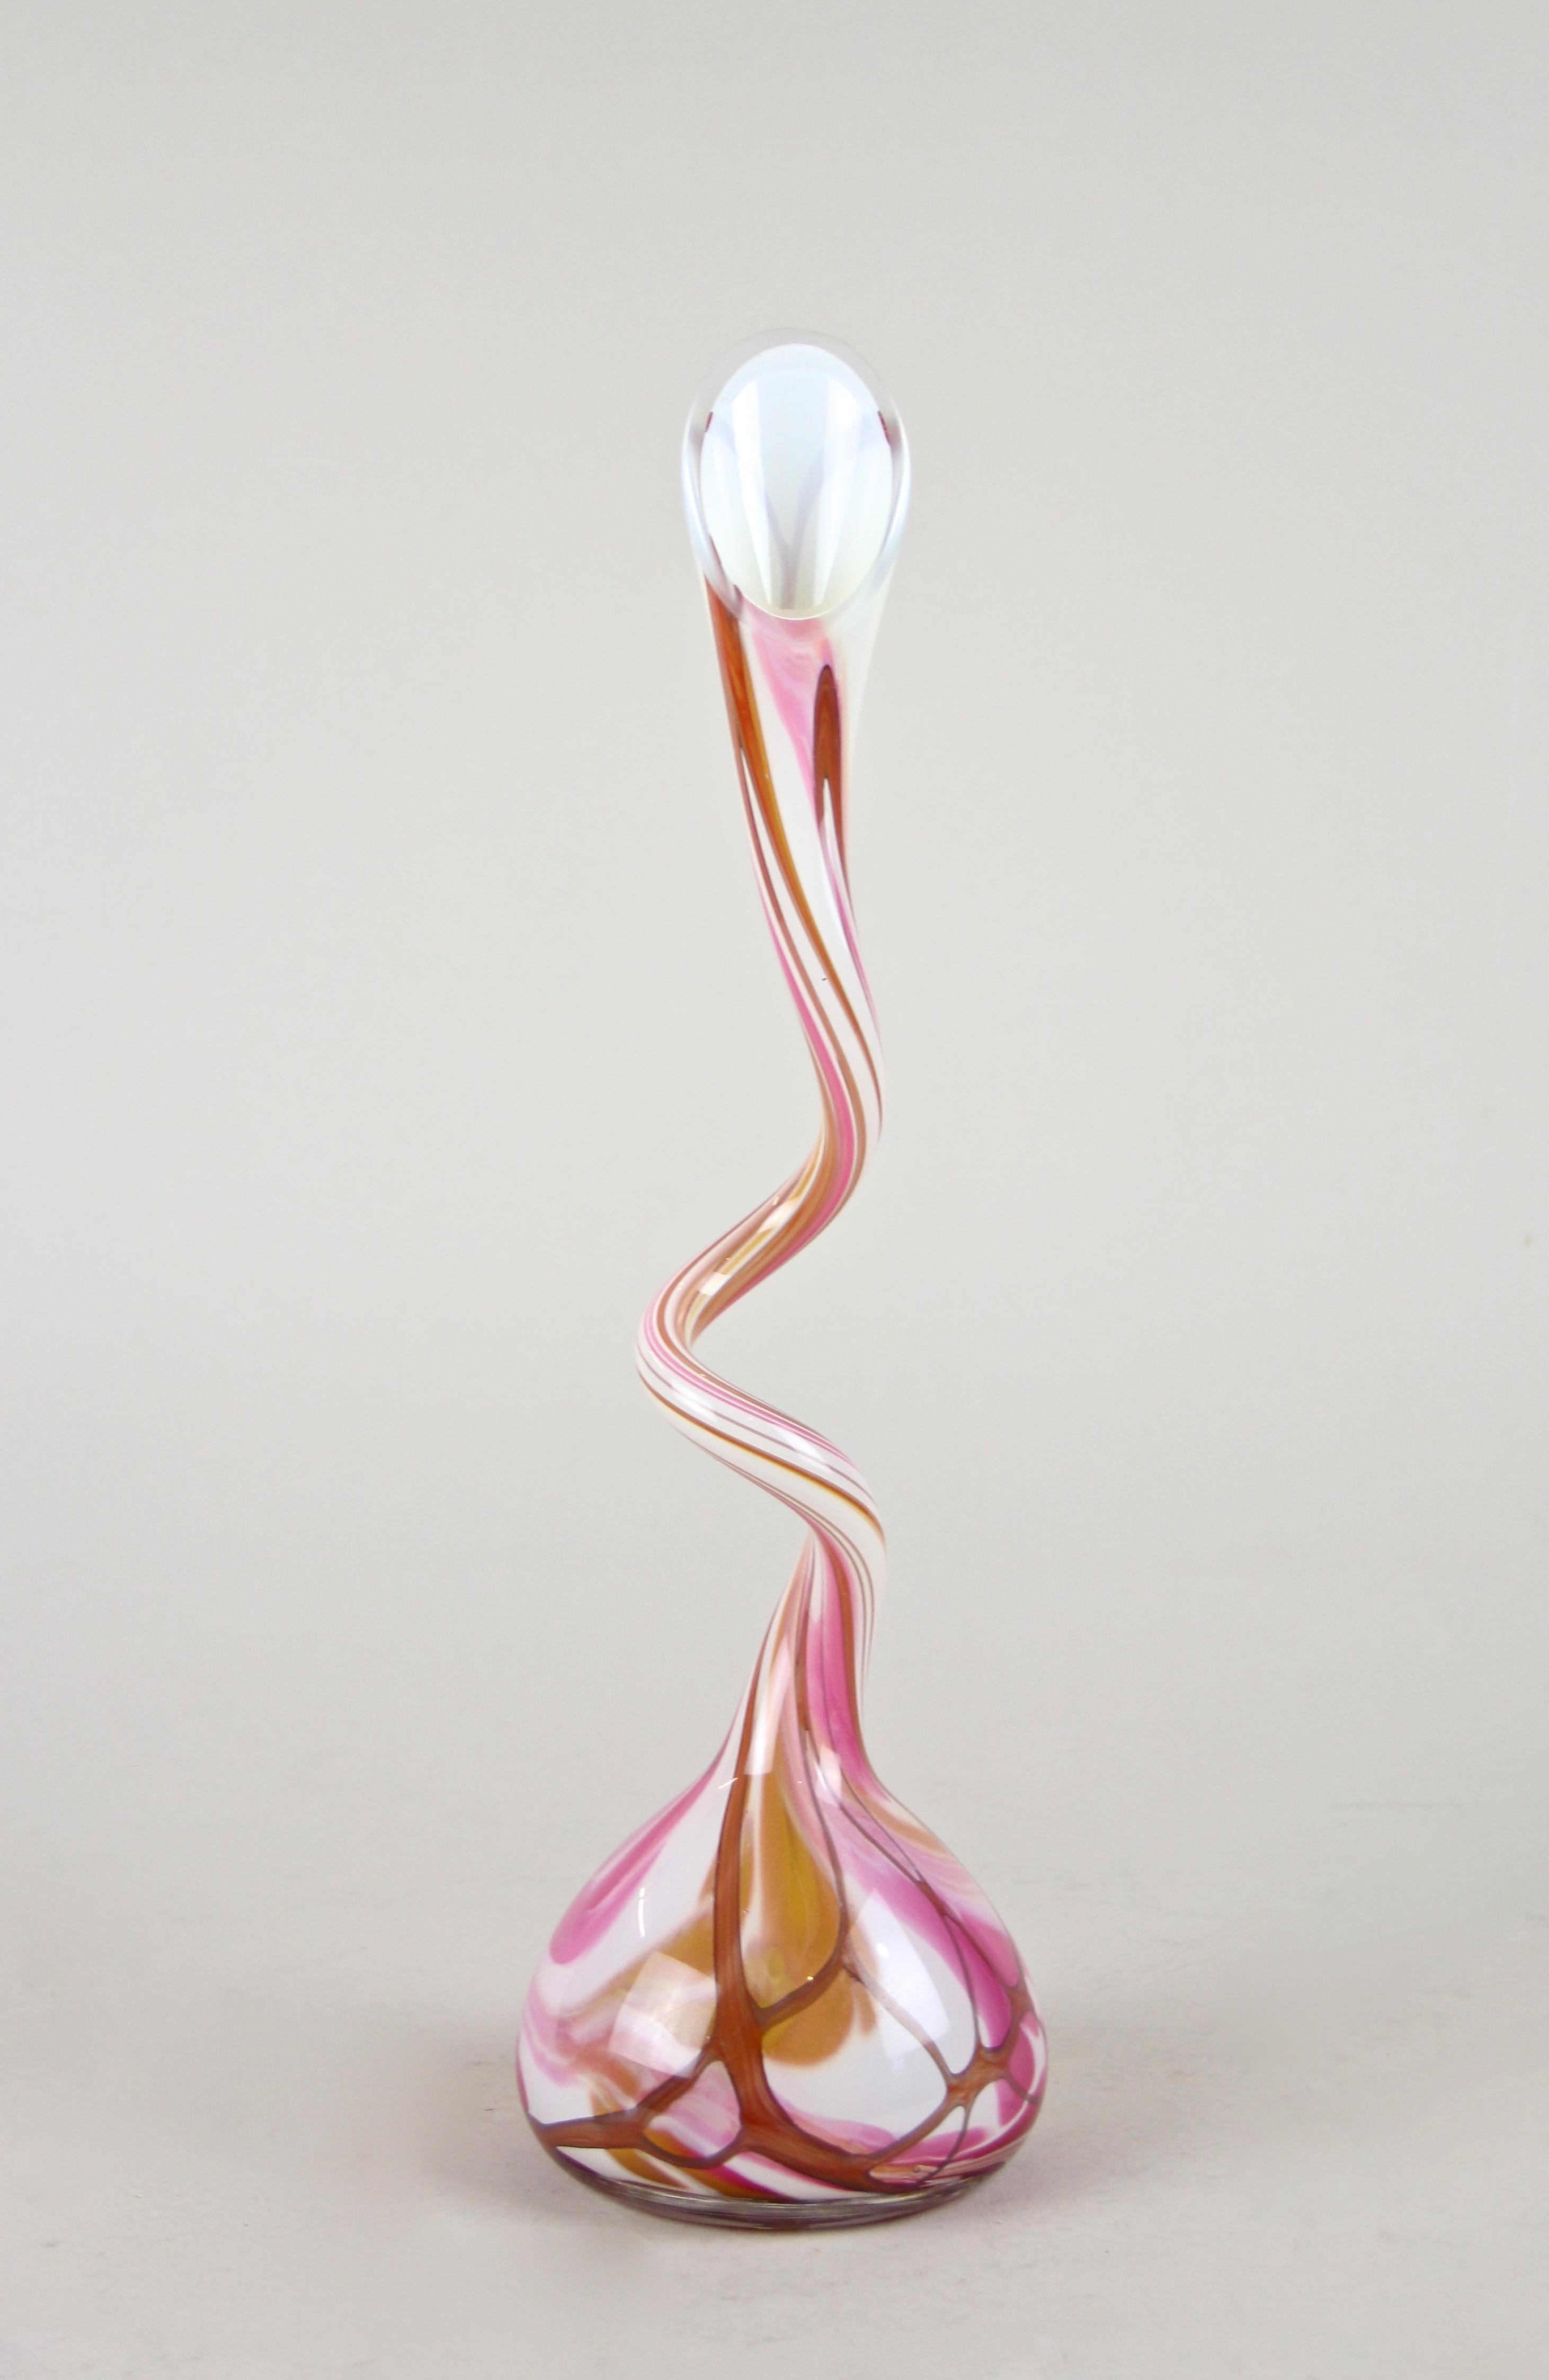 Unusual 1970s colored flashed glass vase out of Austria. The dainty glass vase impresses with fantastic coloration in pink and brown tones and an exceptional twisted design, reminding of a calla lily. The bulbous body transforms into a slim, double